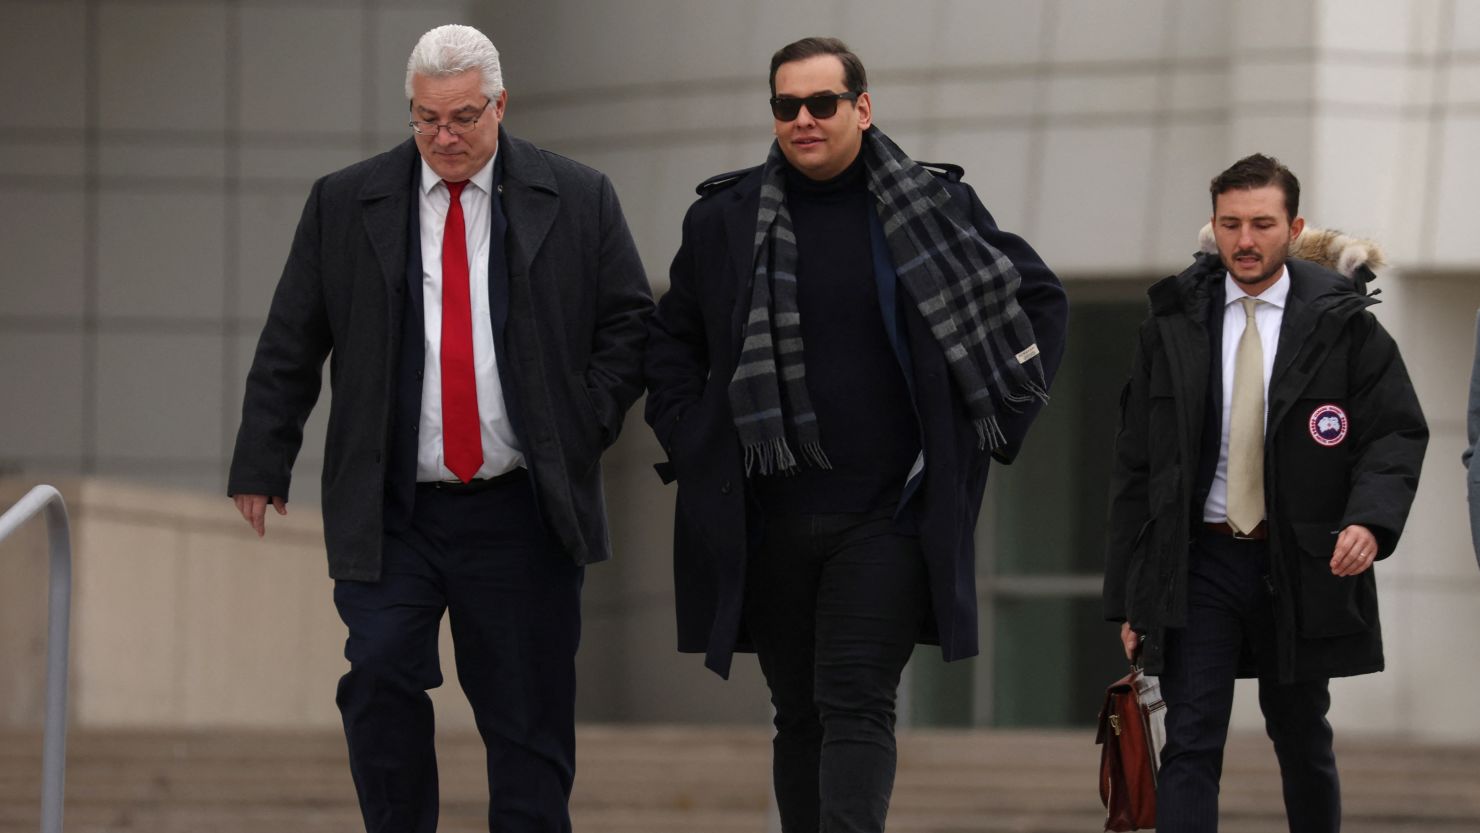 Former U.S. Representative George Santos, who was expelled from the U.S. House of Representatives, leaves his corruption trial at Central Islip Federal Courthouse in Central Islip, New York, U.S., January 23, 2024.